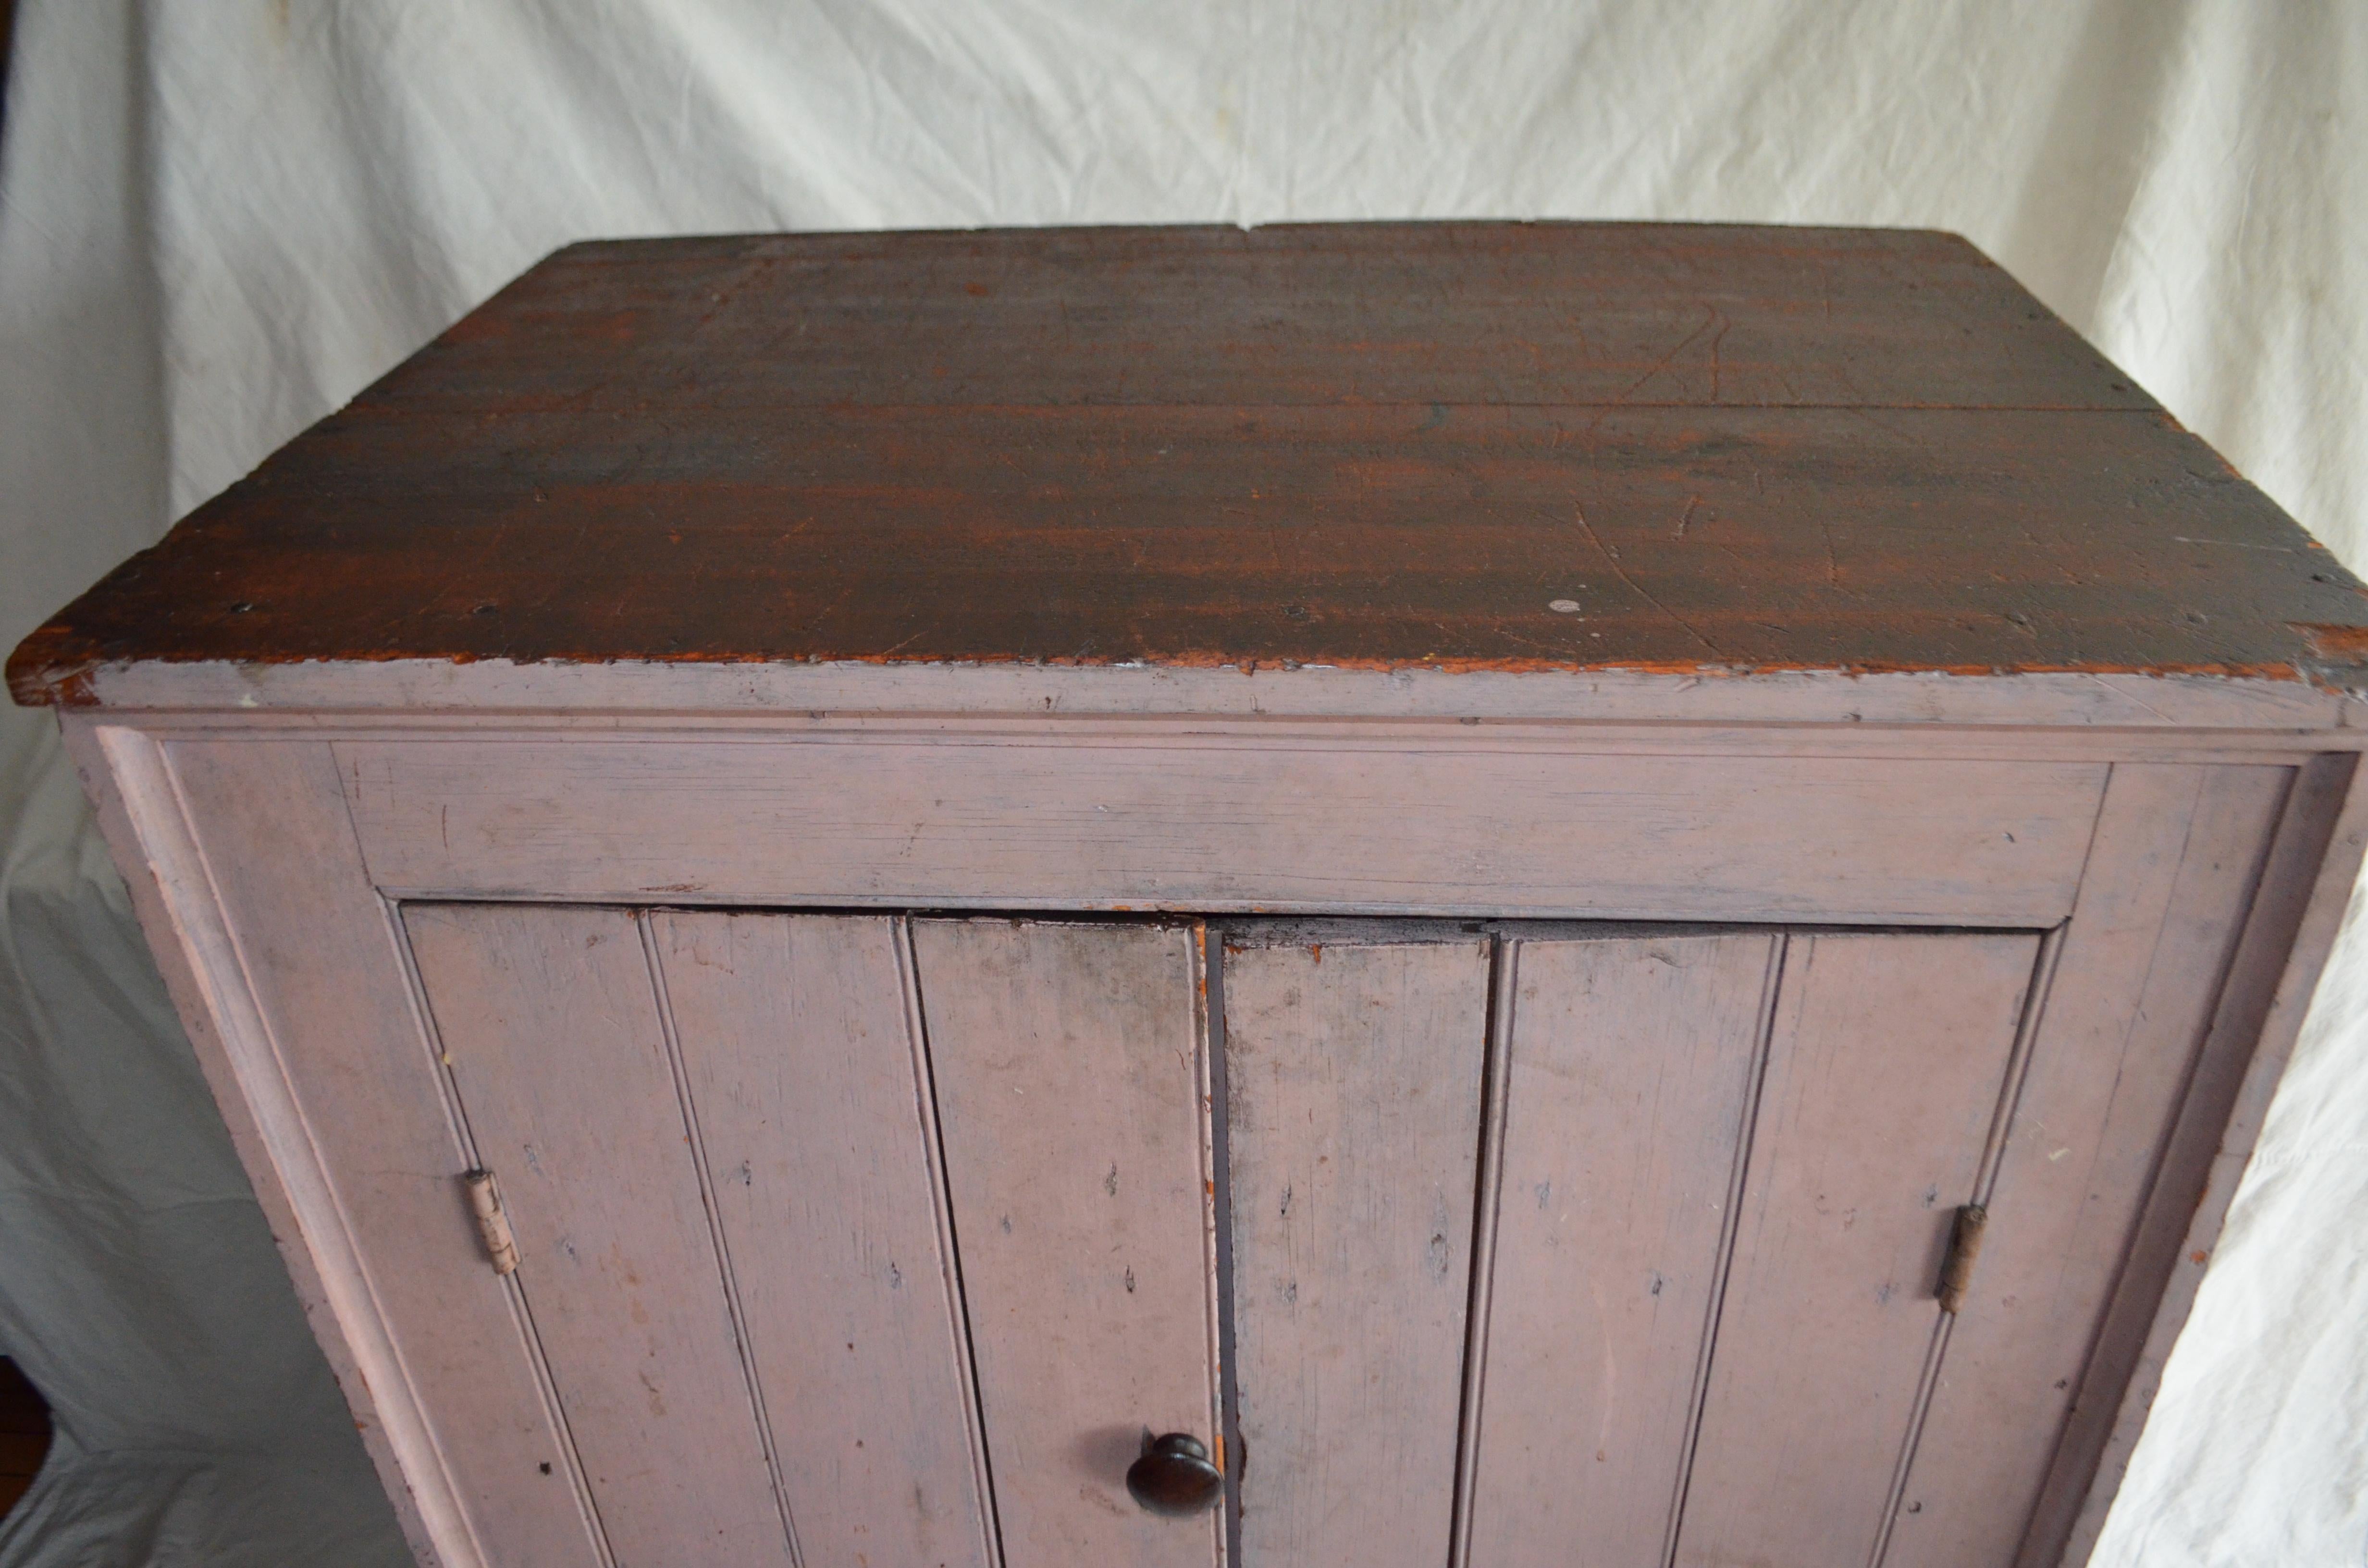 Early 1800s Cupboard for Parlor, Kitchen, Pantry with Lockbox Inside 1